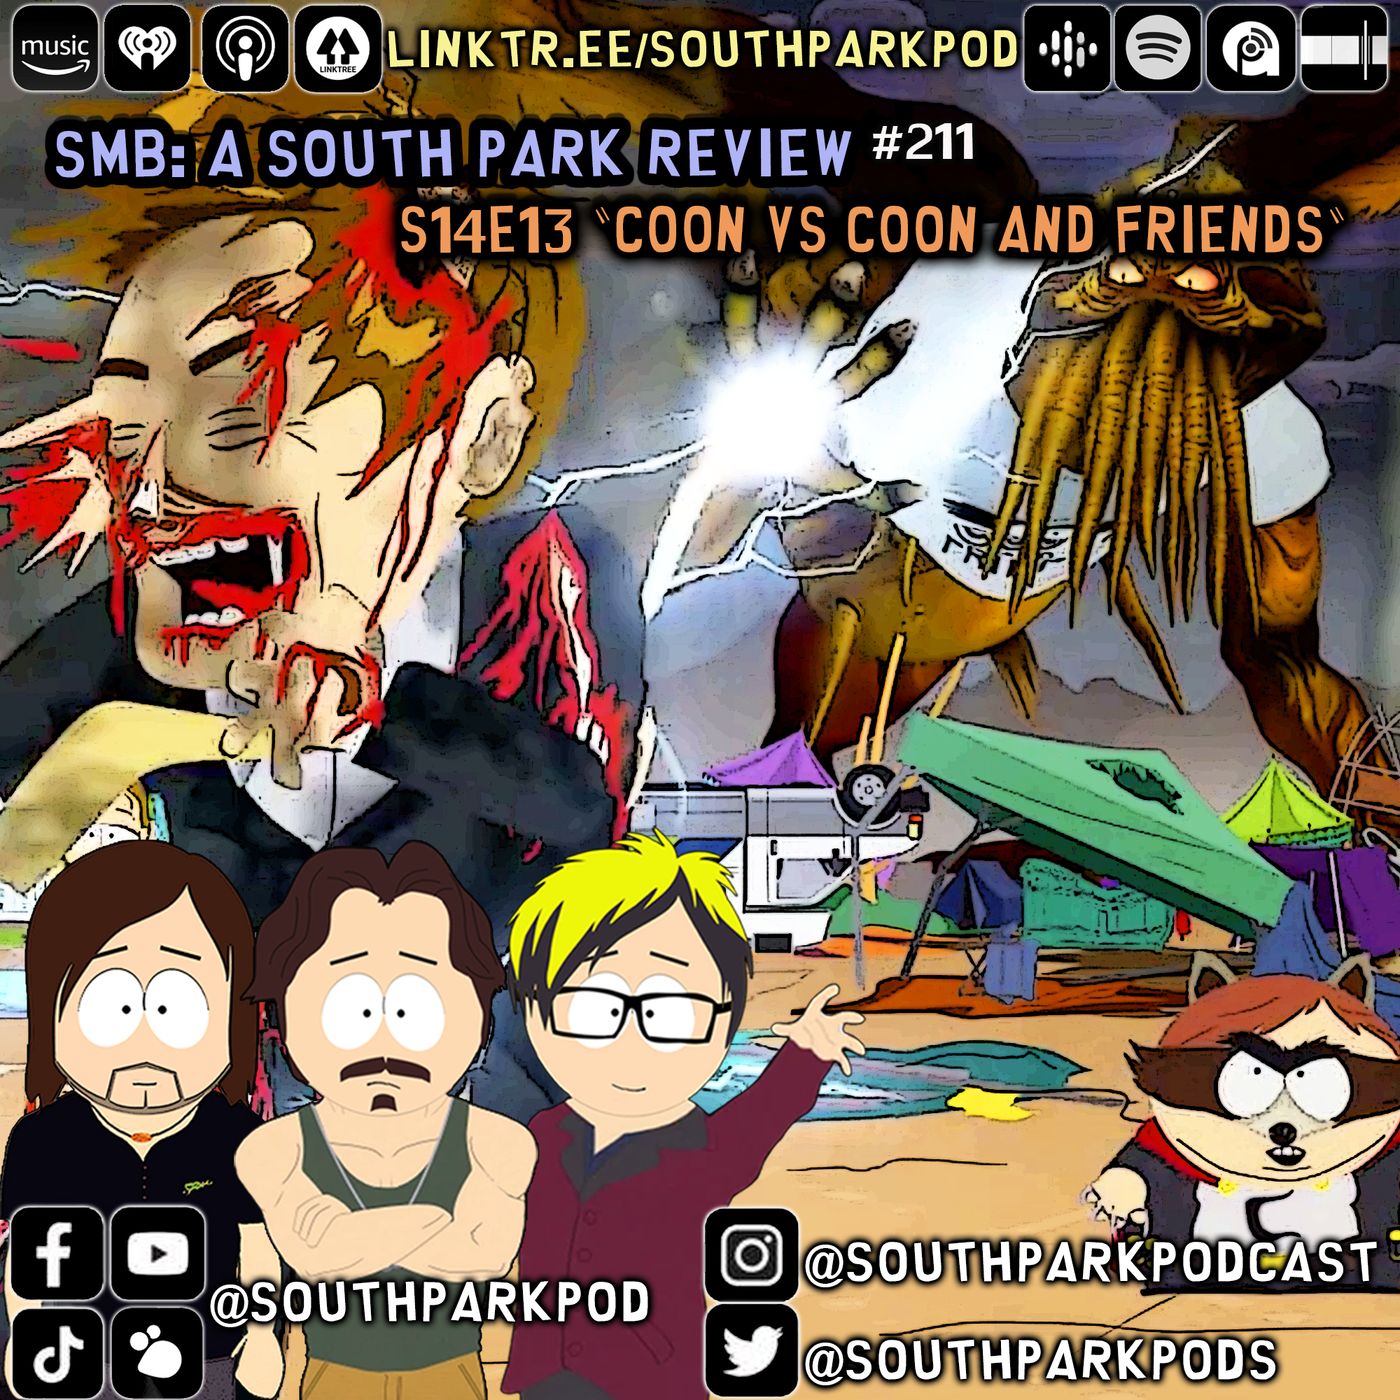 SMB #211 - S14E13 Coon vs Coon And Friends - ”Kewl. Oh Get That Fire-Twirling Hippie B!tch.